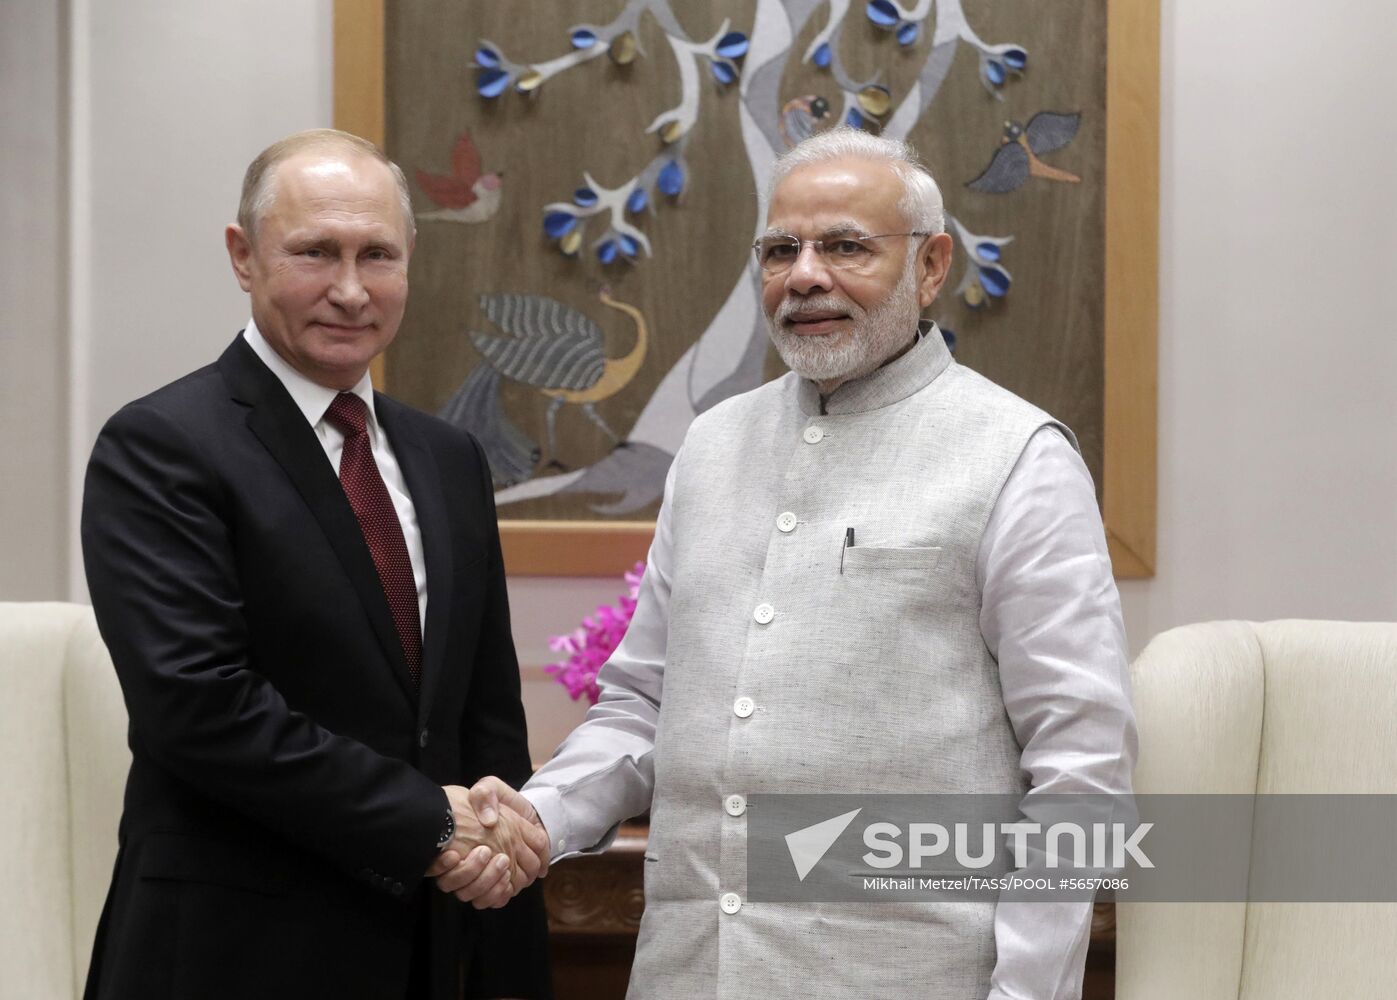 President Putin's official visit to India